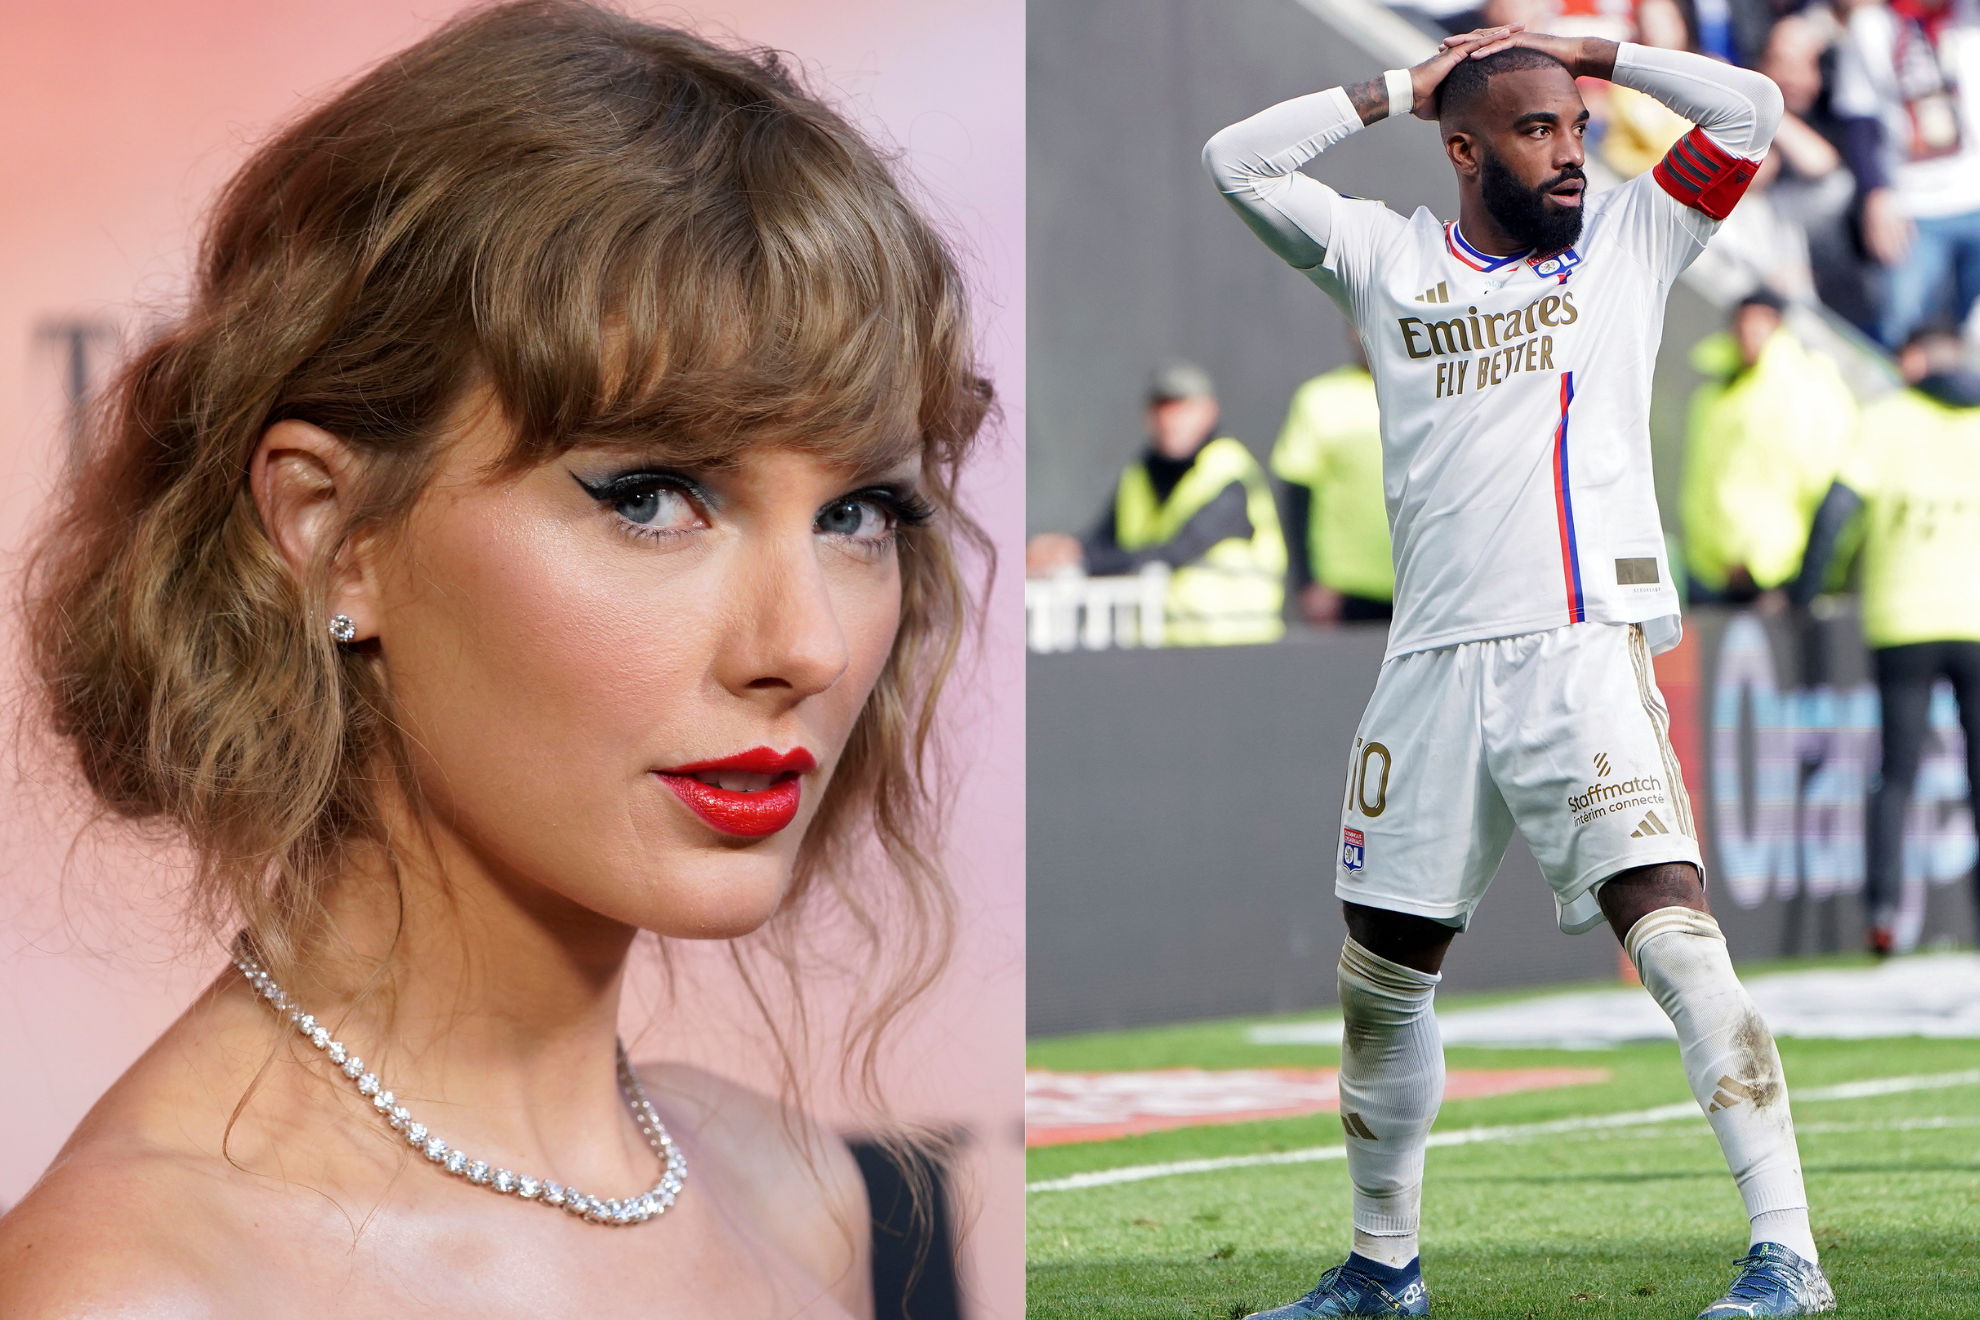 Why Taylor Swift's Eras Tour could plunge this French soccer team into chaos